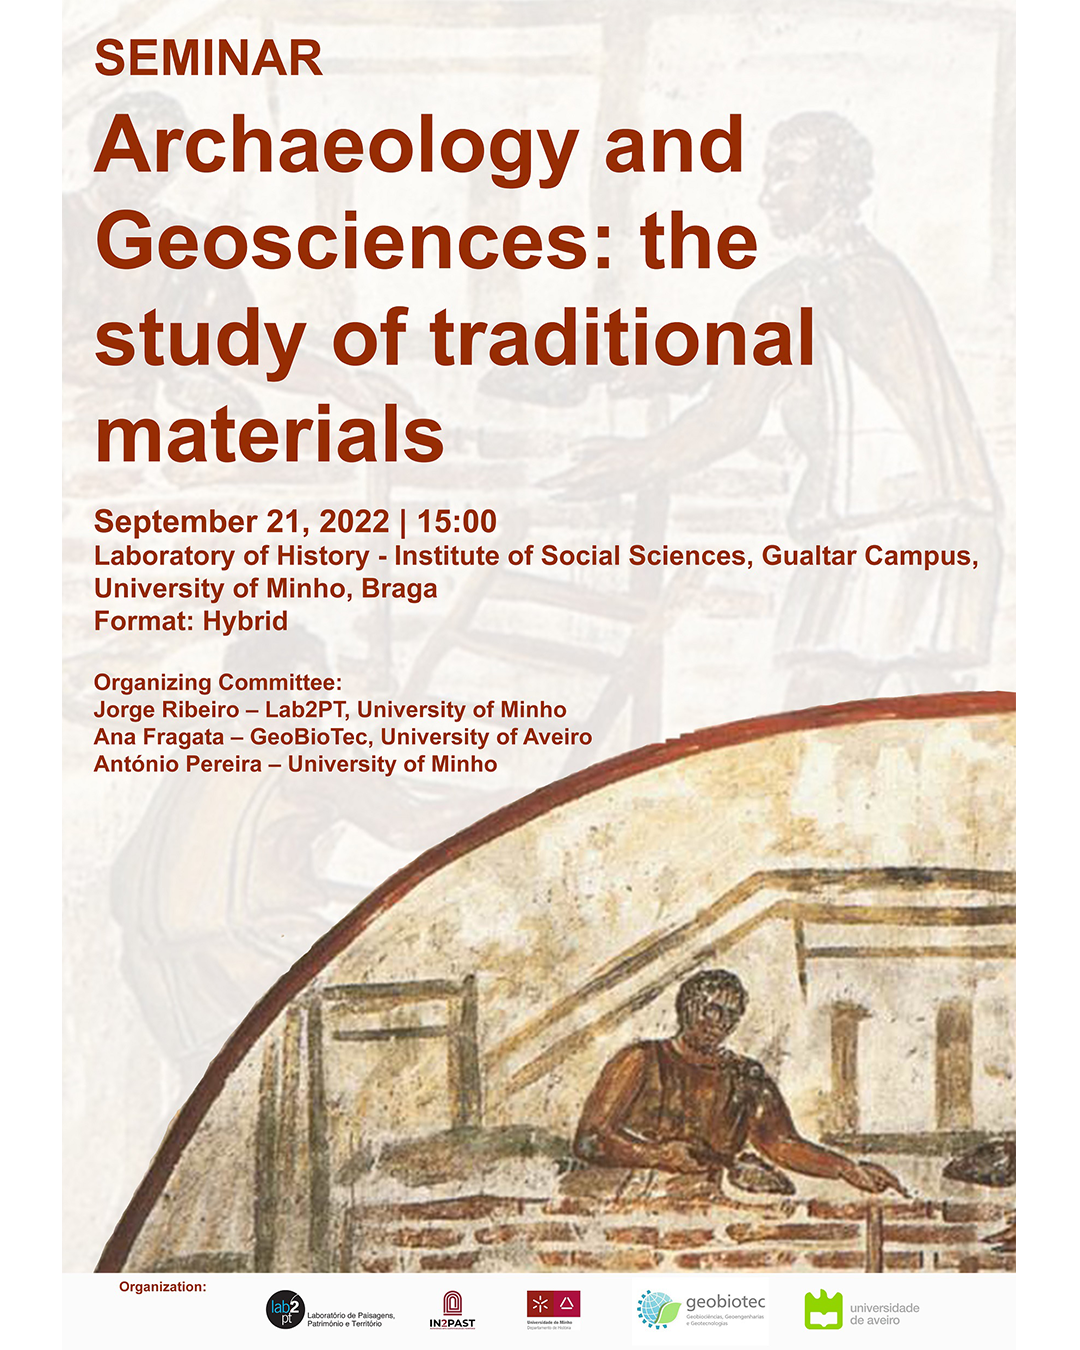 Seminar "Archaeology and Geosciences: the study of traditional materials" image